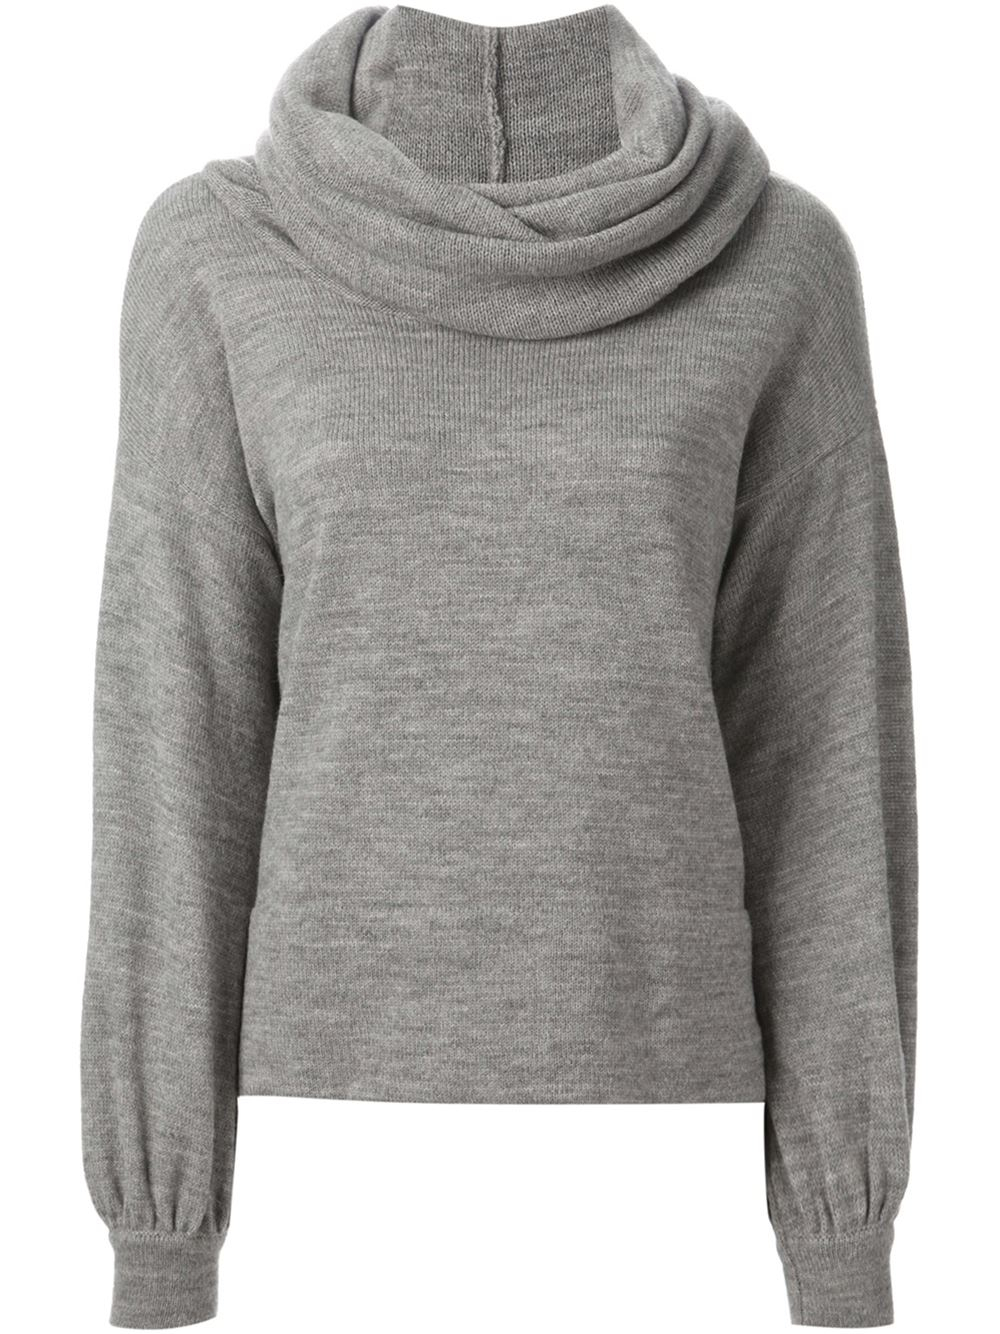 Societe anonyme Cowl Neck Sweater in Gray | Lyst